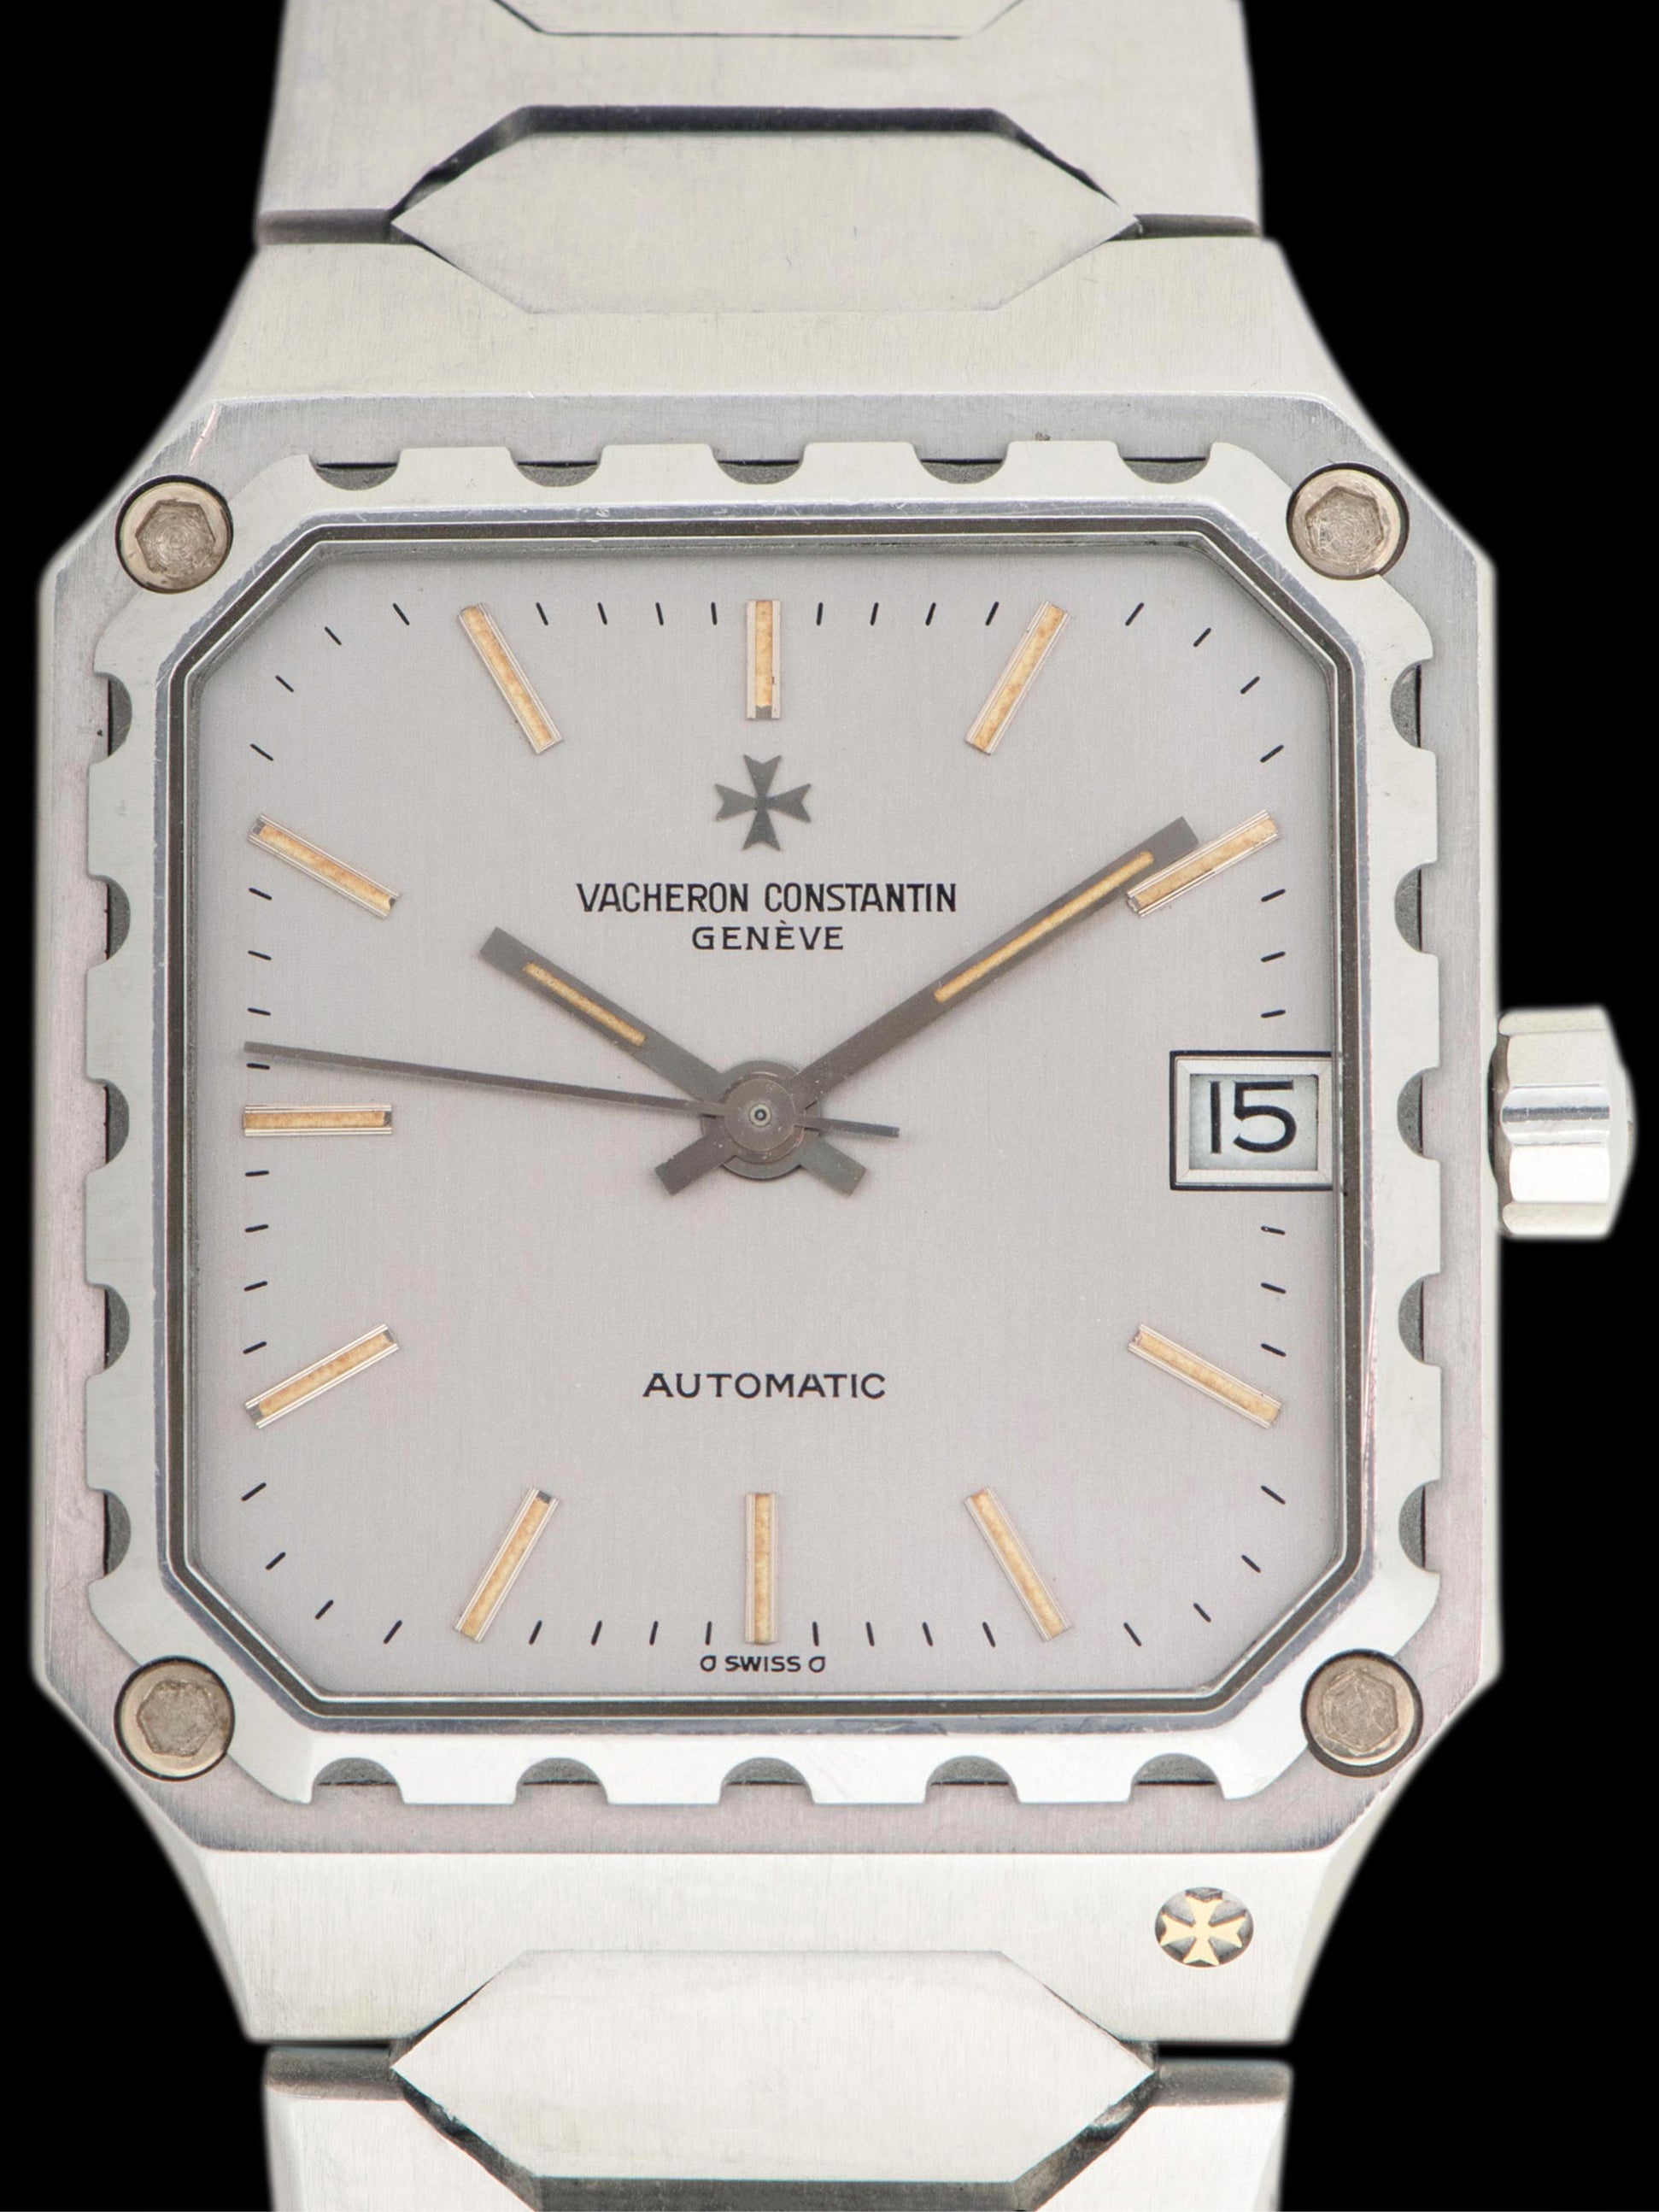 1982 Vacheron Constantin 222 (Ref. 46004/411) "Square Case" W/ Extract From The Archives